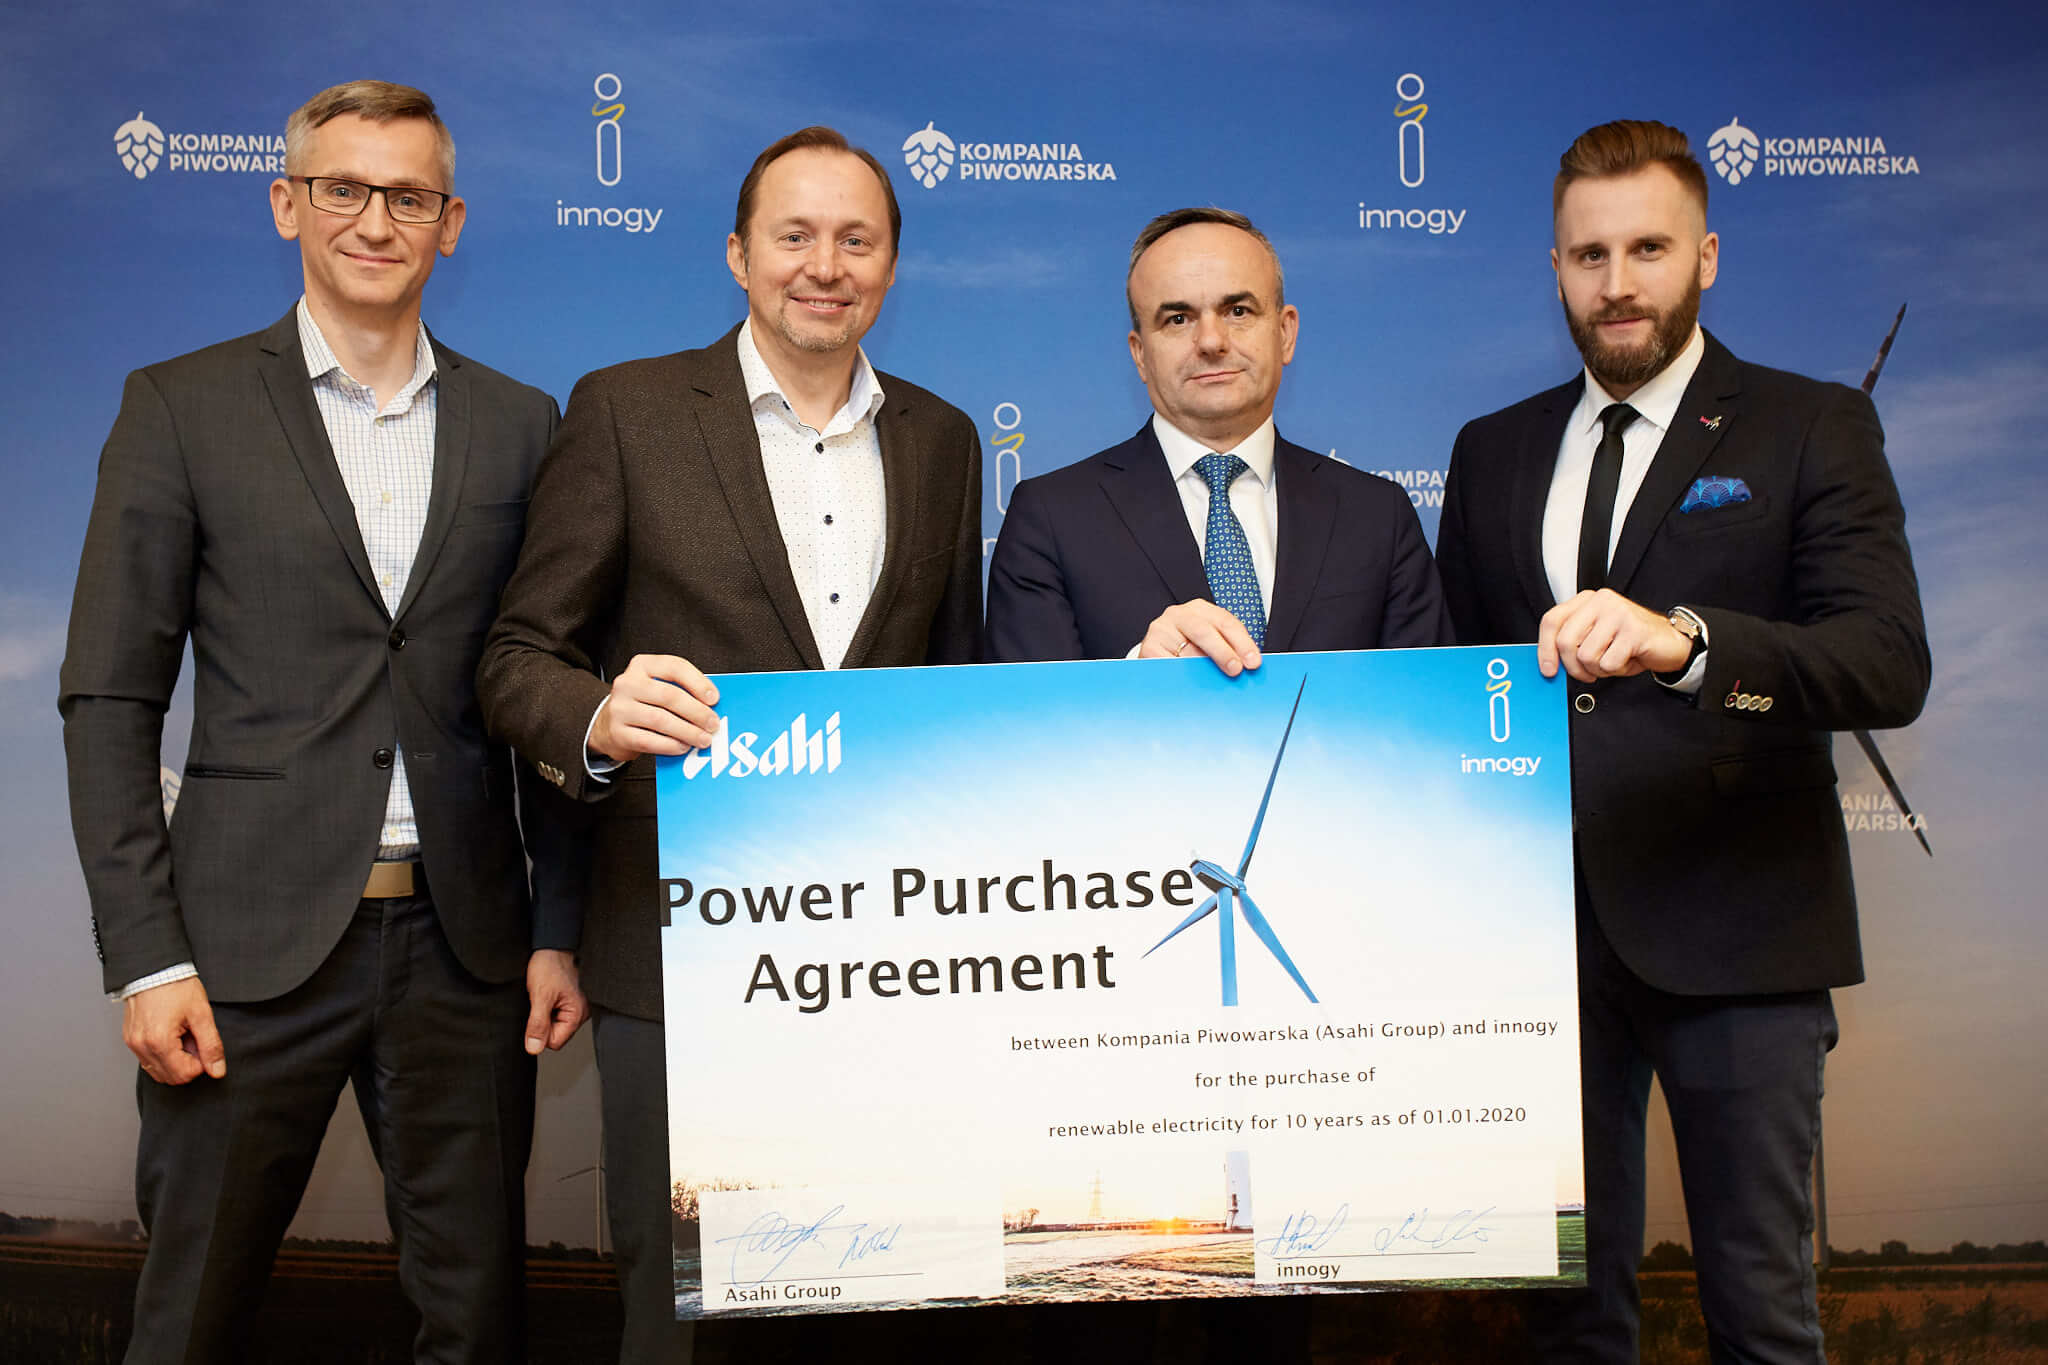 Kompania Piwowarska’s breweries switch to 100% wind electricity thanks to cooperation with innogy.